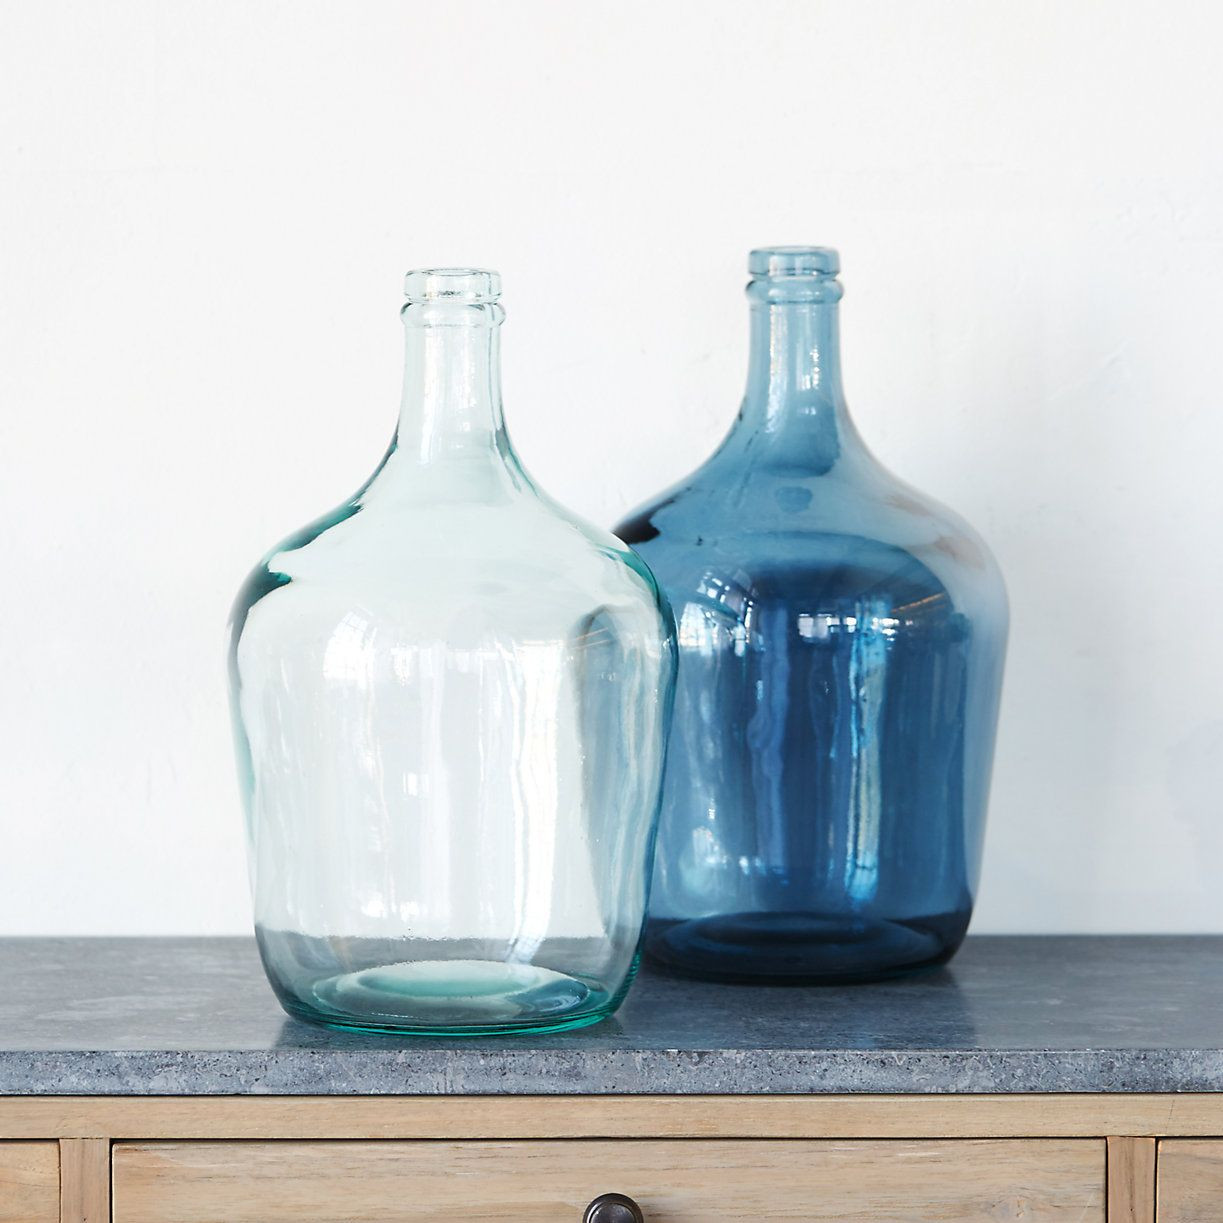 20 Fabulous Tall Thin Clear Glass Vases 2023 free download tall thin clear glass vases of glass bottleneck vase house stuff pinterest vintage wine regarding inspired by the shape of vintage wine jugs this colorful vase has a tall slim neck to hold a